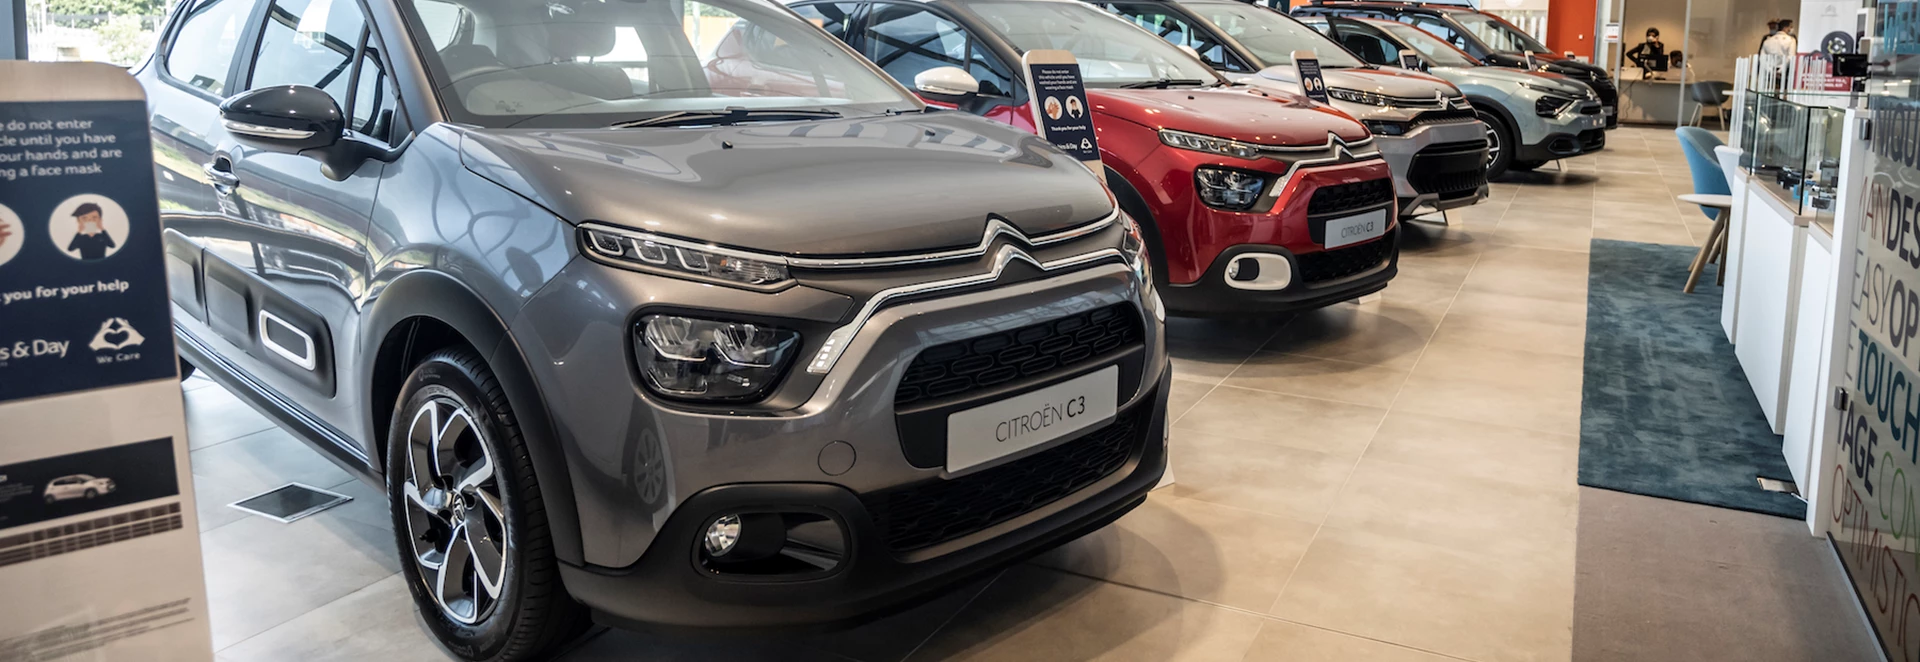 Citroen becomes first car firm to introduce British Sign Language at its dealerships 